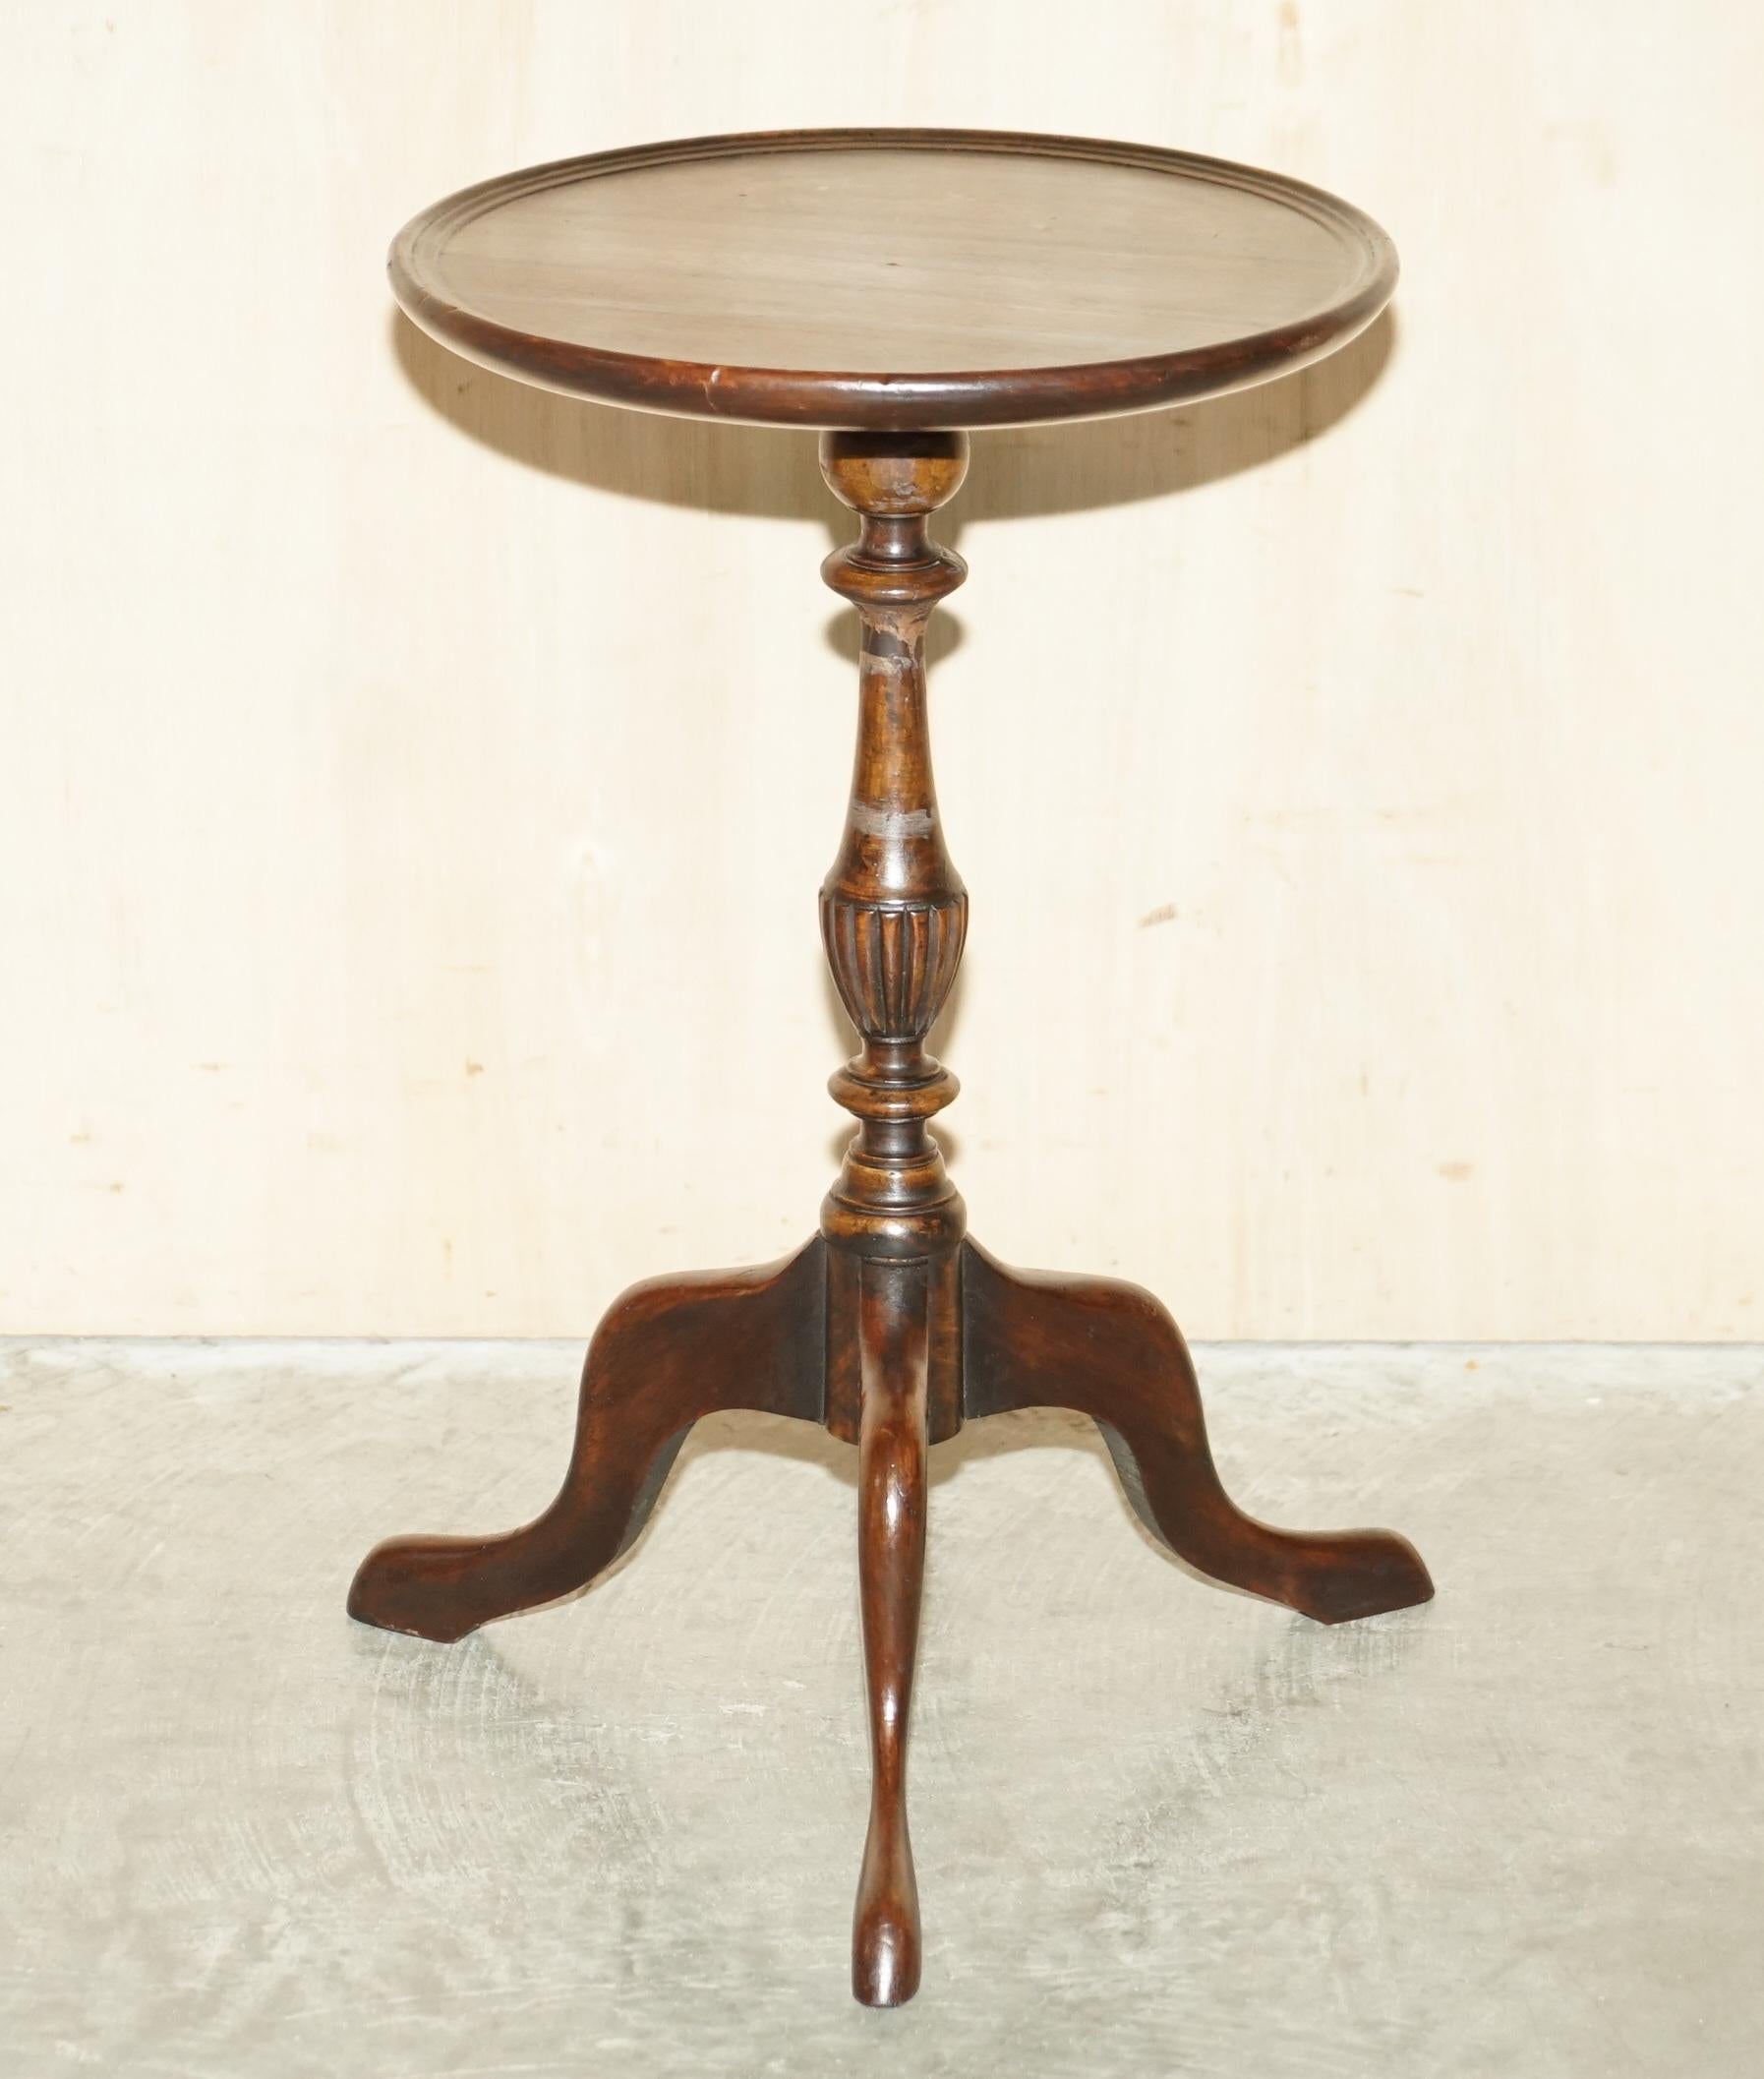 We are delighted to offer for sale this lovely restored vintage light Mahogany lamp or side table

It has a lovely flamed mahogany top which has a little lip around the edge 

We have cleaned waxed and polished it from top to bottom, the main